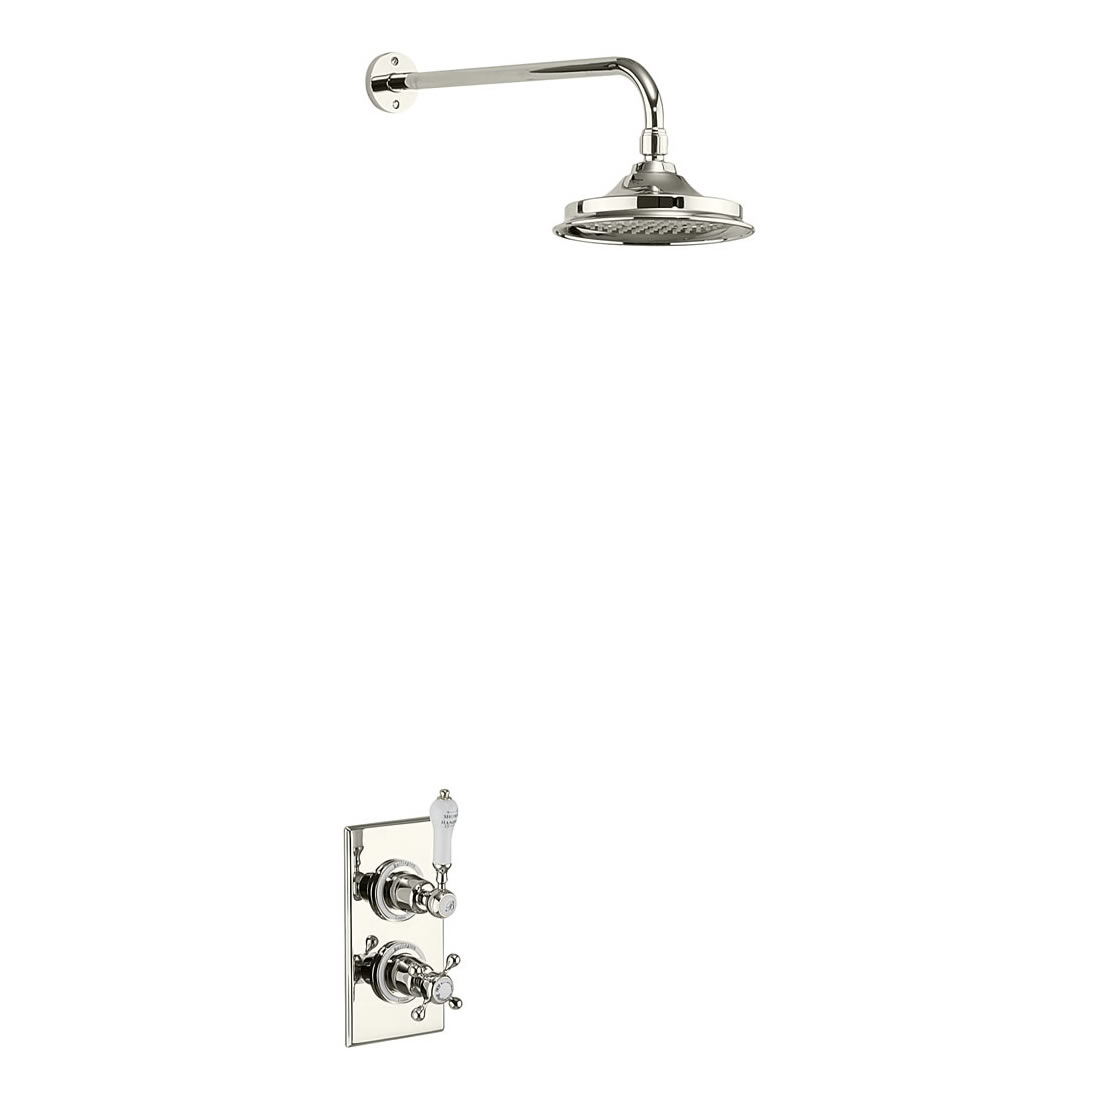 Trent Thermostatic Single Outlet Concealed Shower Valve with Fixed Shower Arm with 12 inch rose  - NICKEL